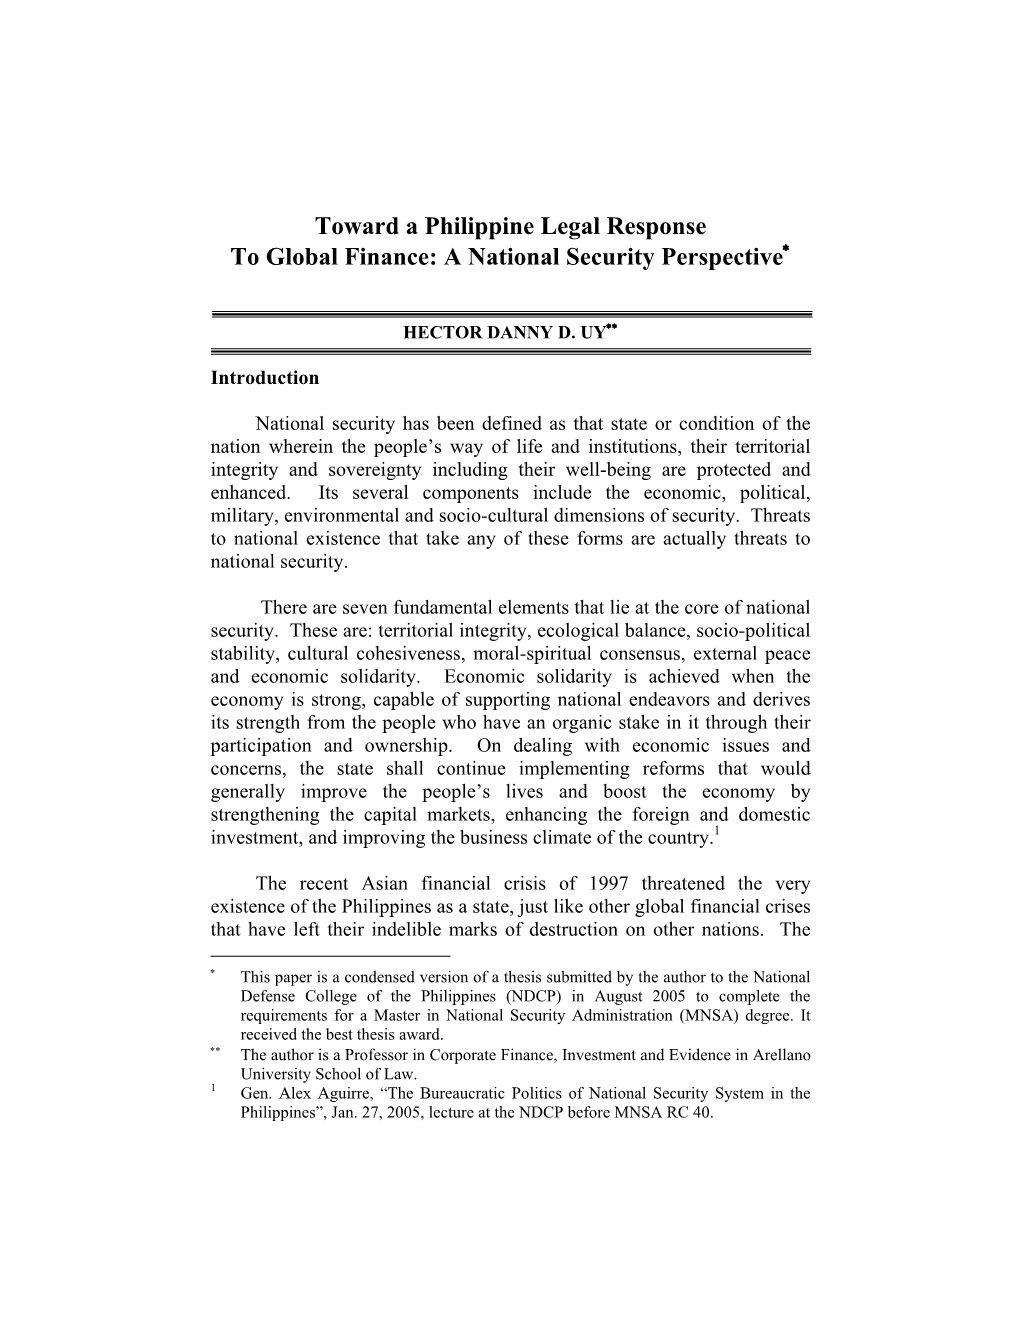 Toward a Philippine Legal Response to Global Finance: a National Security Perspective∗